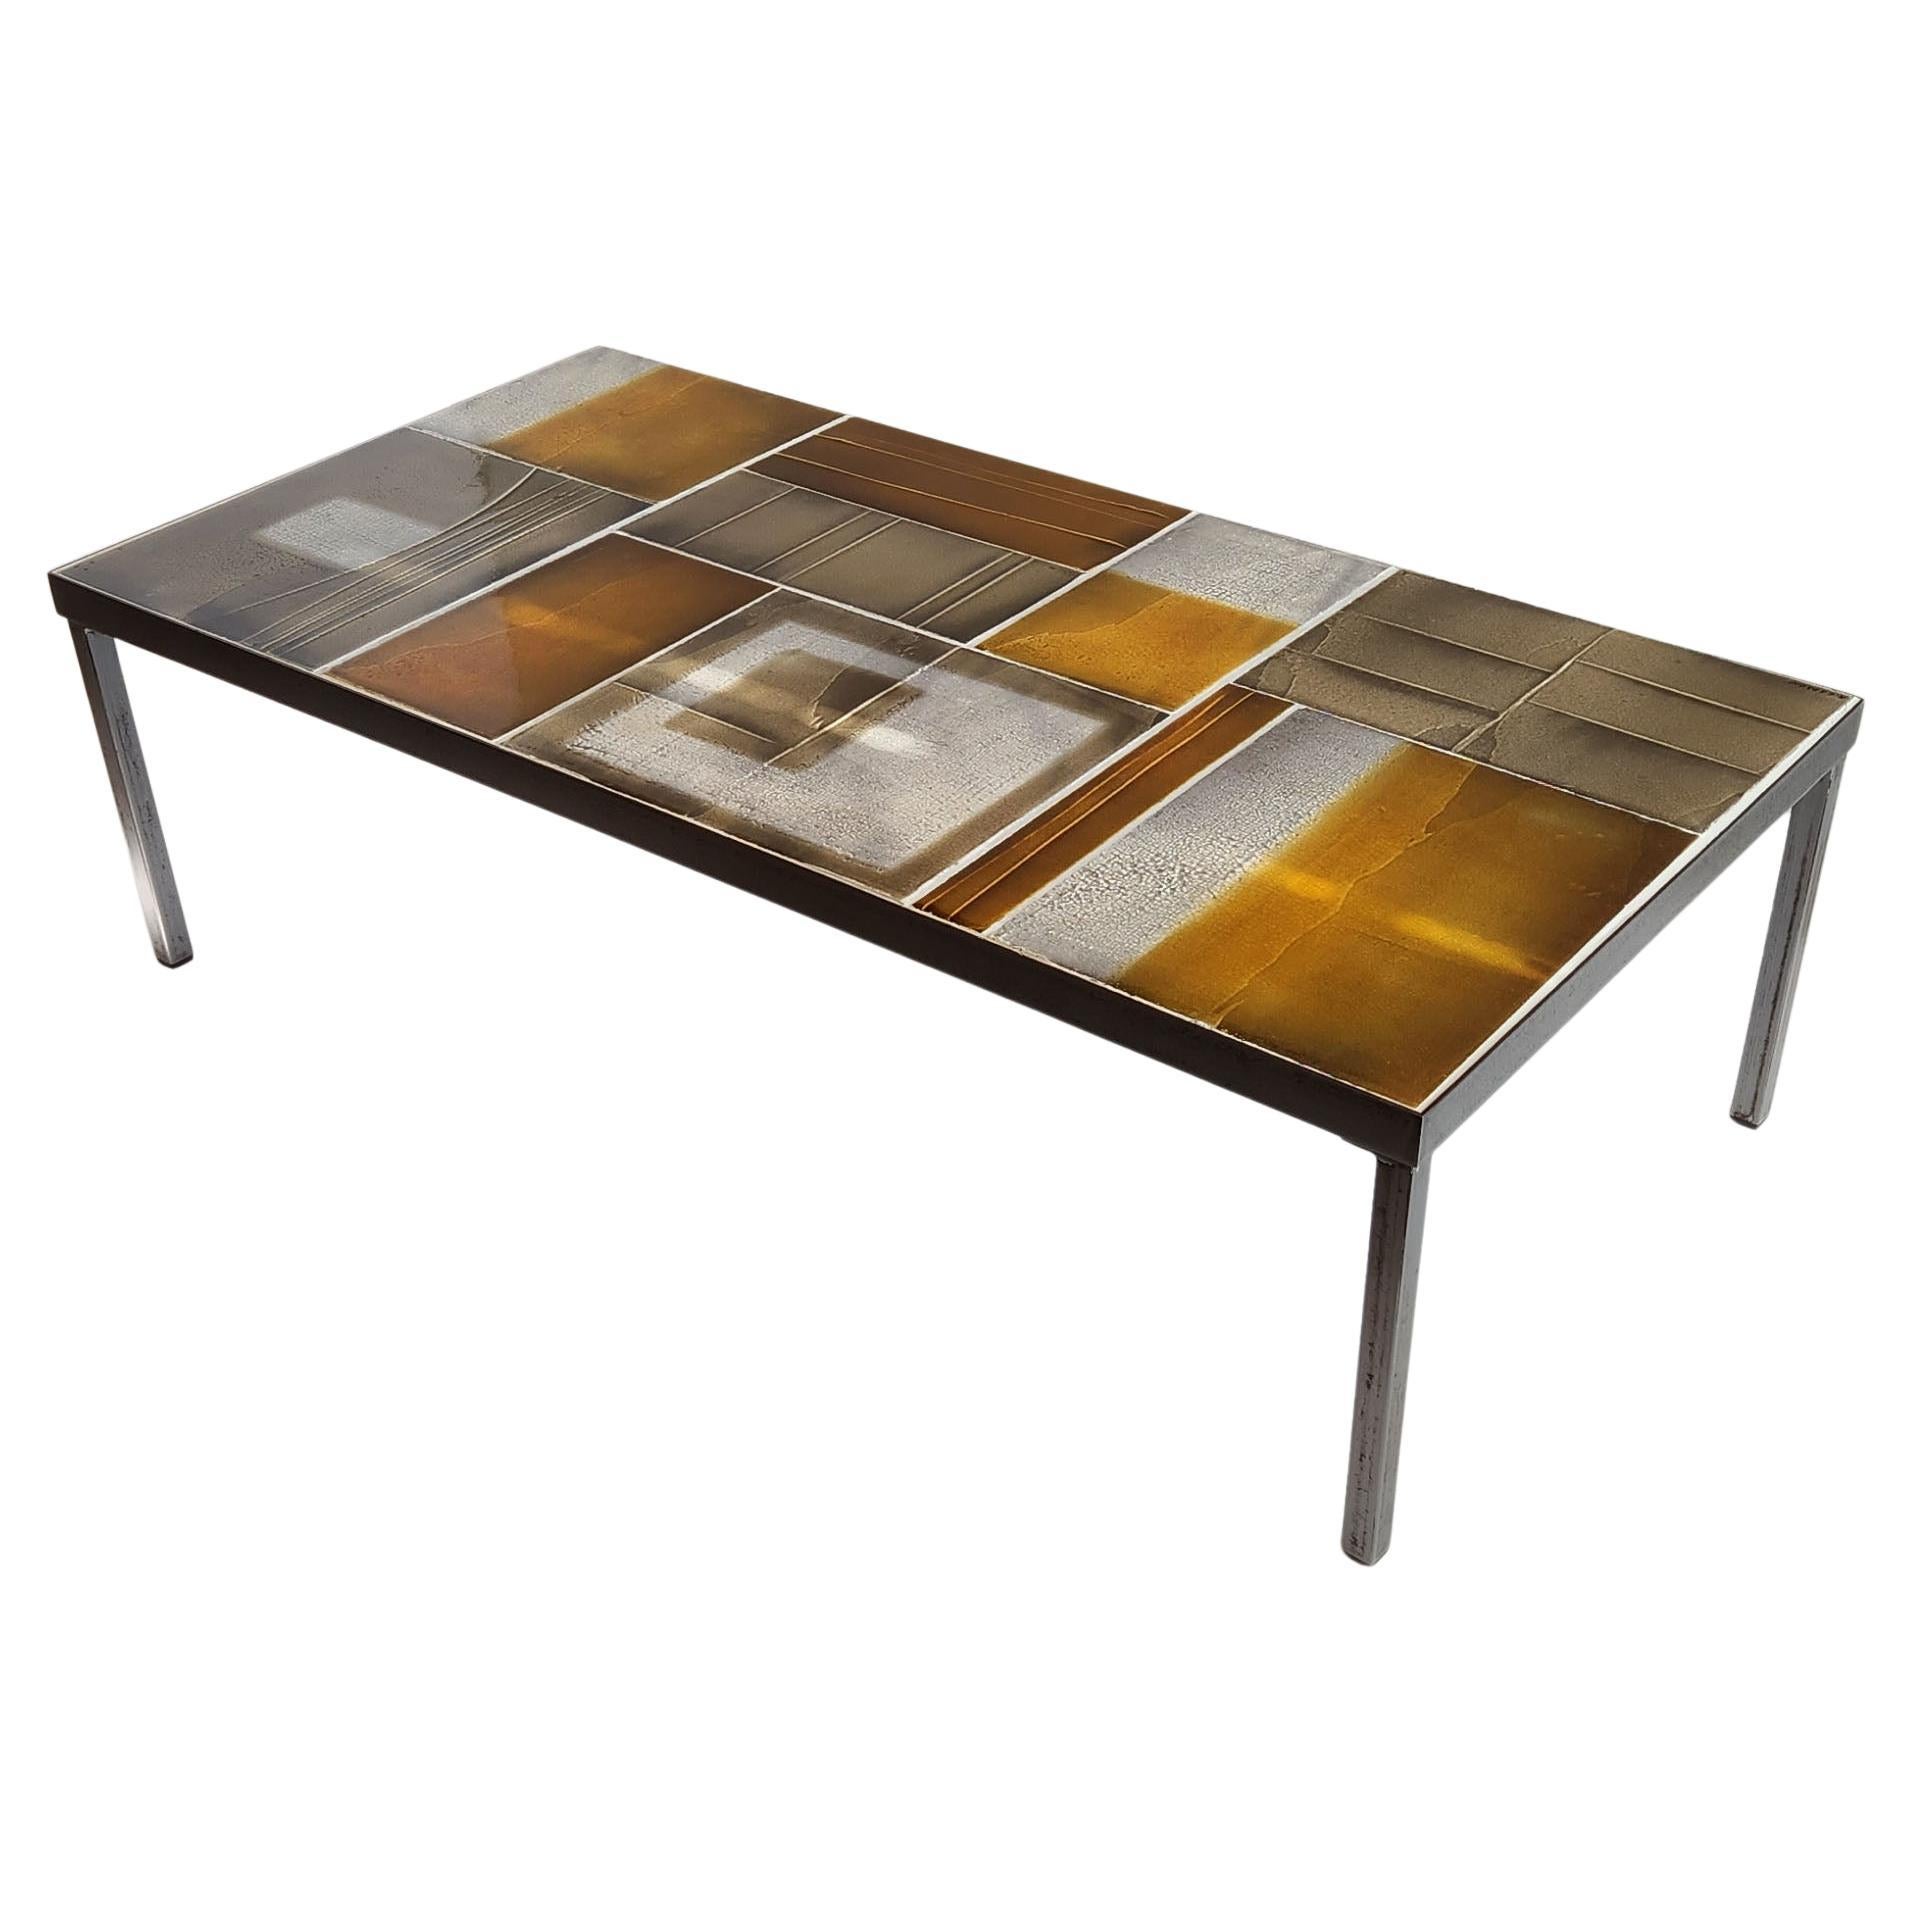 Roger Capron - 1970's Coffee Table with Lava Tiles Series on a Metal Frame  For Sale